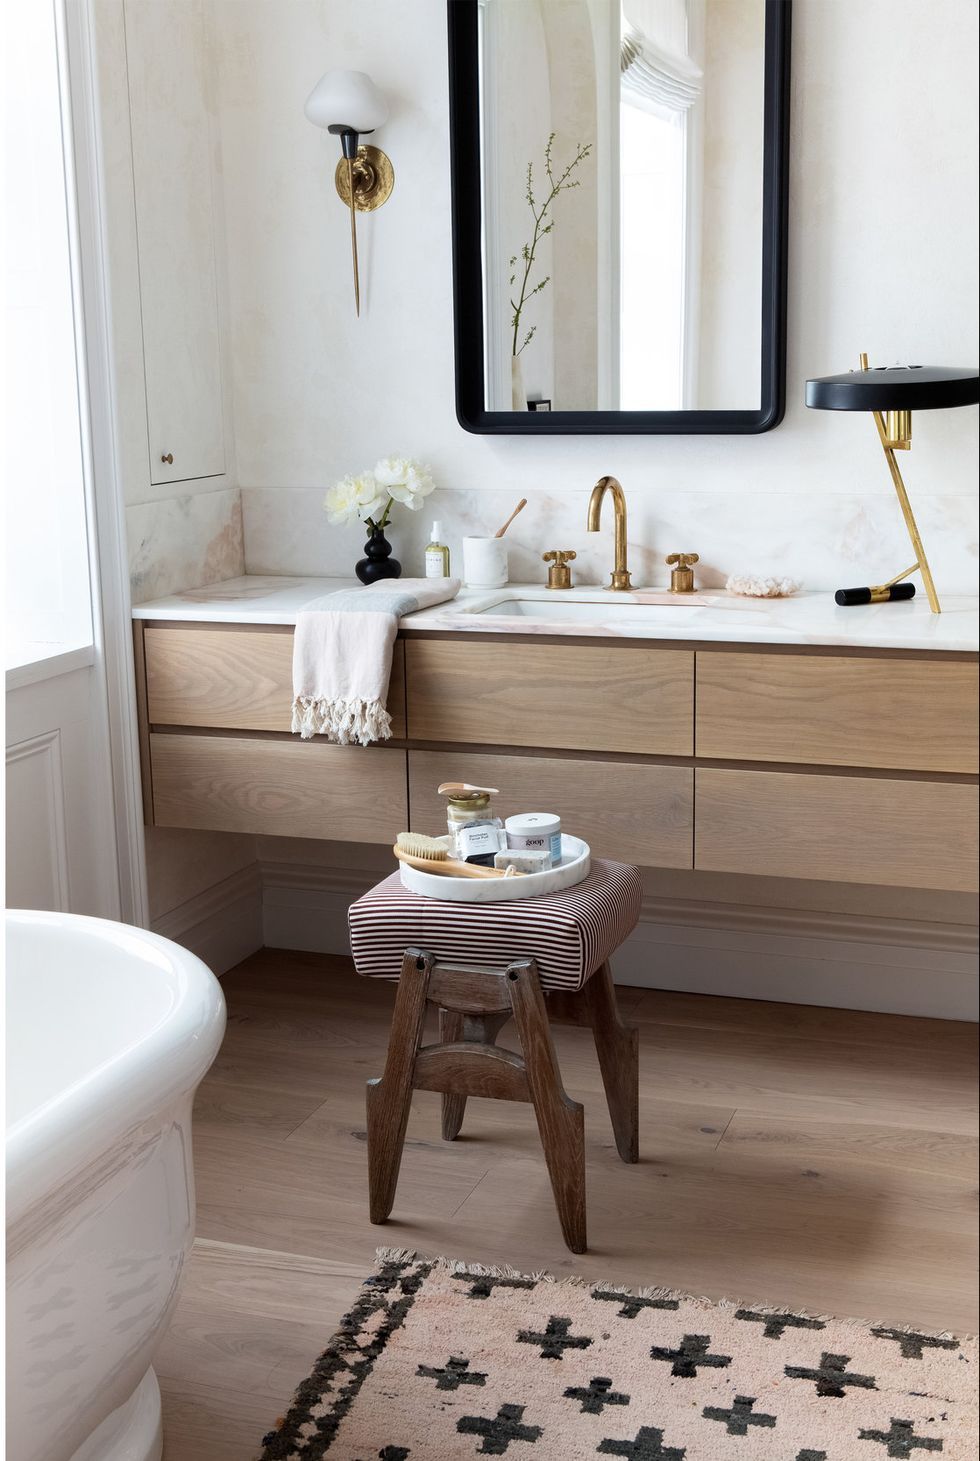 21 Bathroom Storage and Organization Ideas - How to Organize Your Bathroom  Counter and Vanity